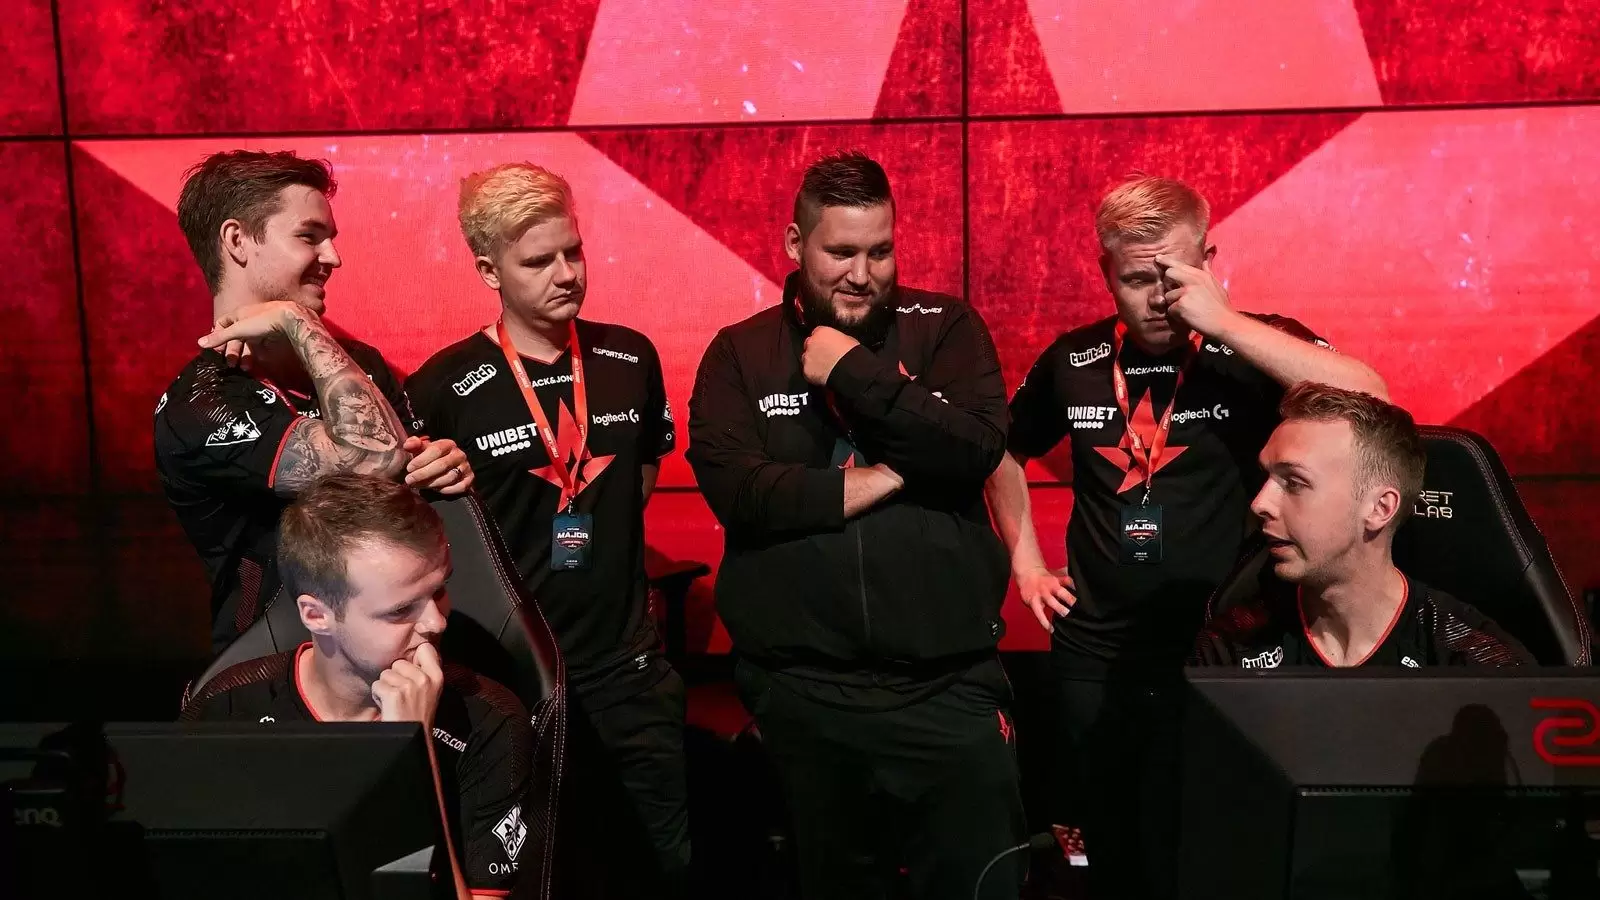 R6 Siege leak suggests Astralis is buying Disrupt Gaming to enter R6 esports